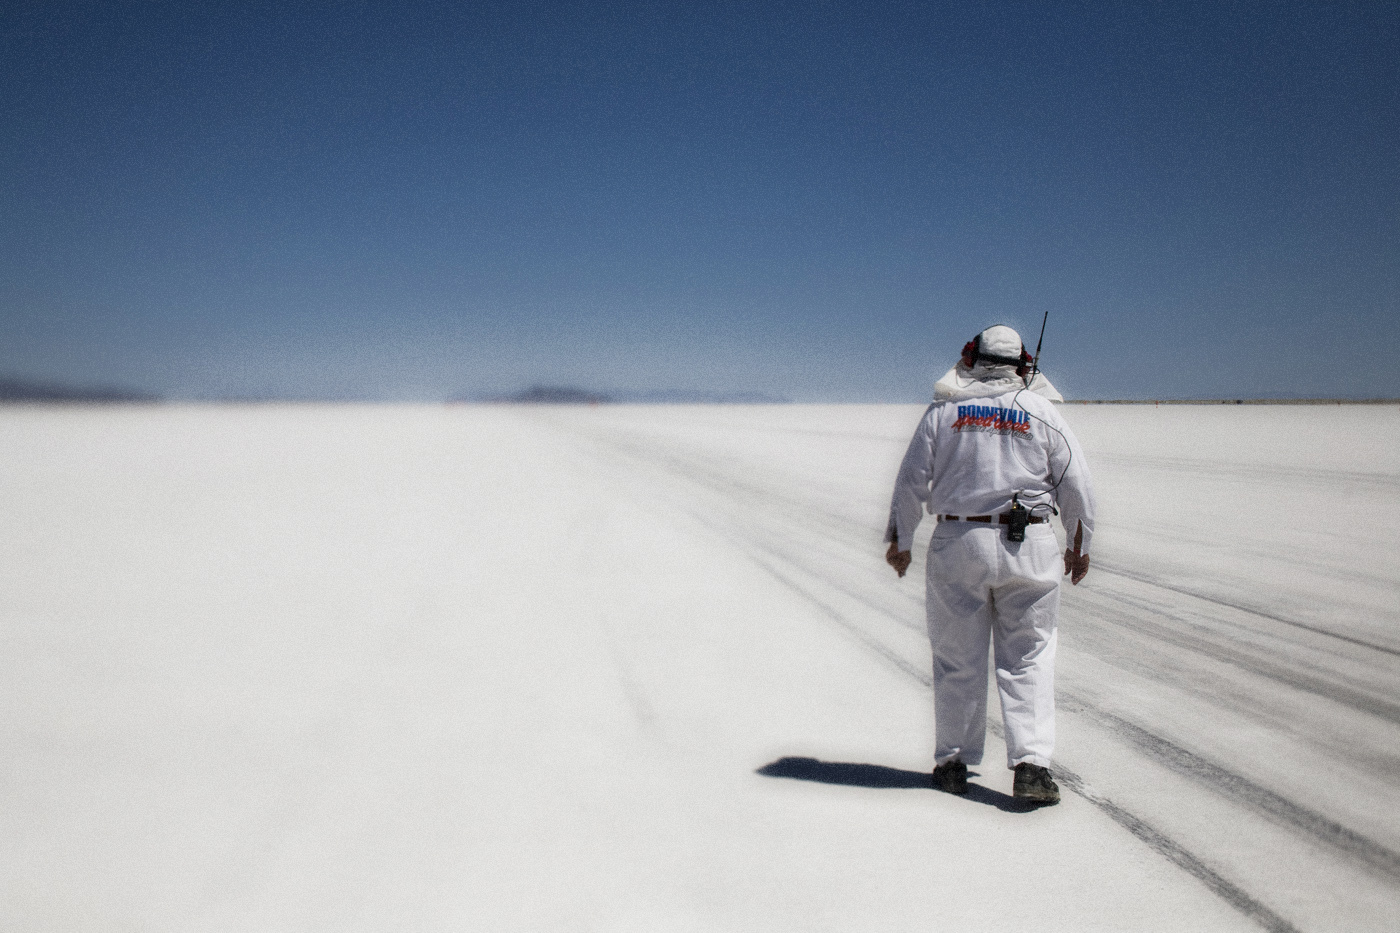 For the first time in 20 years I returned to the Bonneville Salt Flats, where in my teen years I hung around with a Yashica Mat and watched the cars go 300+ mph. It's a place unto itself, even today : On the Salt : David Burnett | Photographer